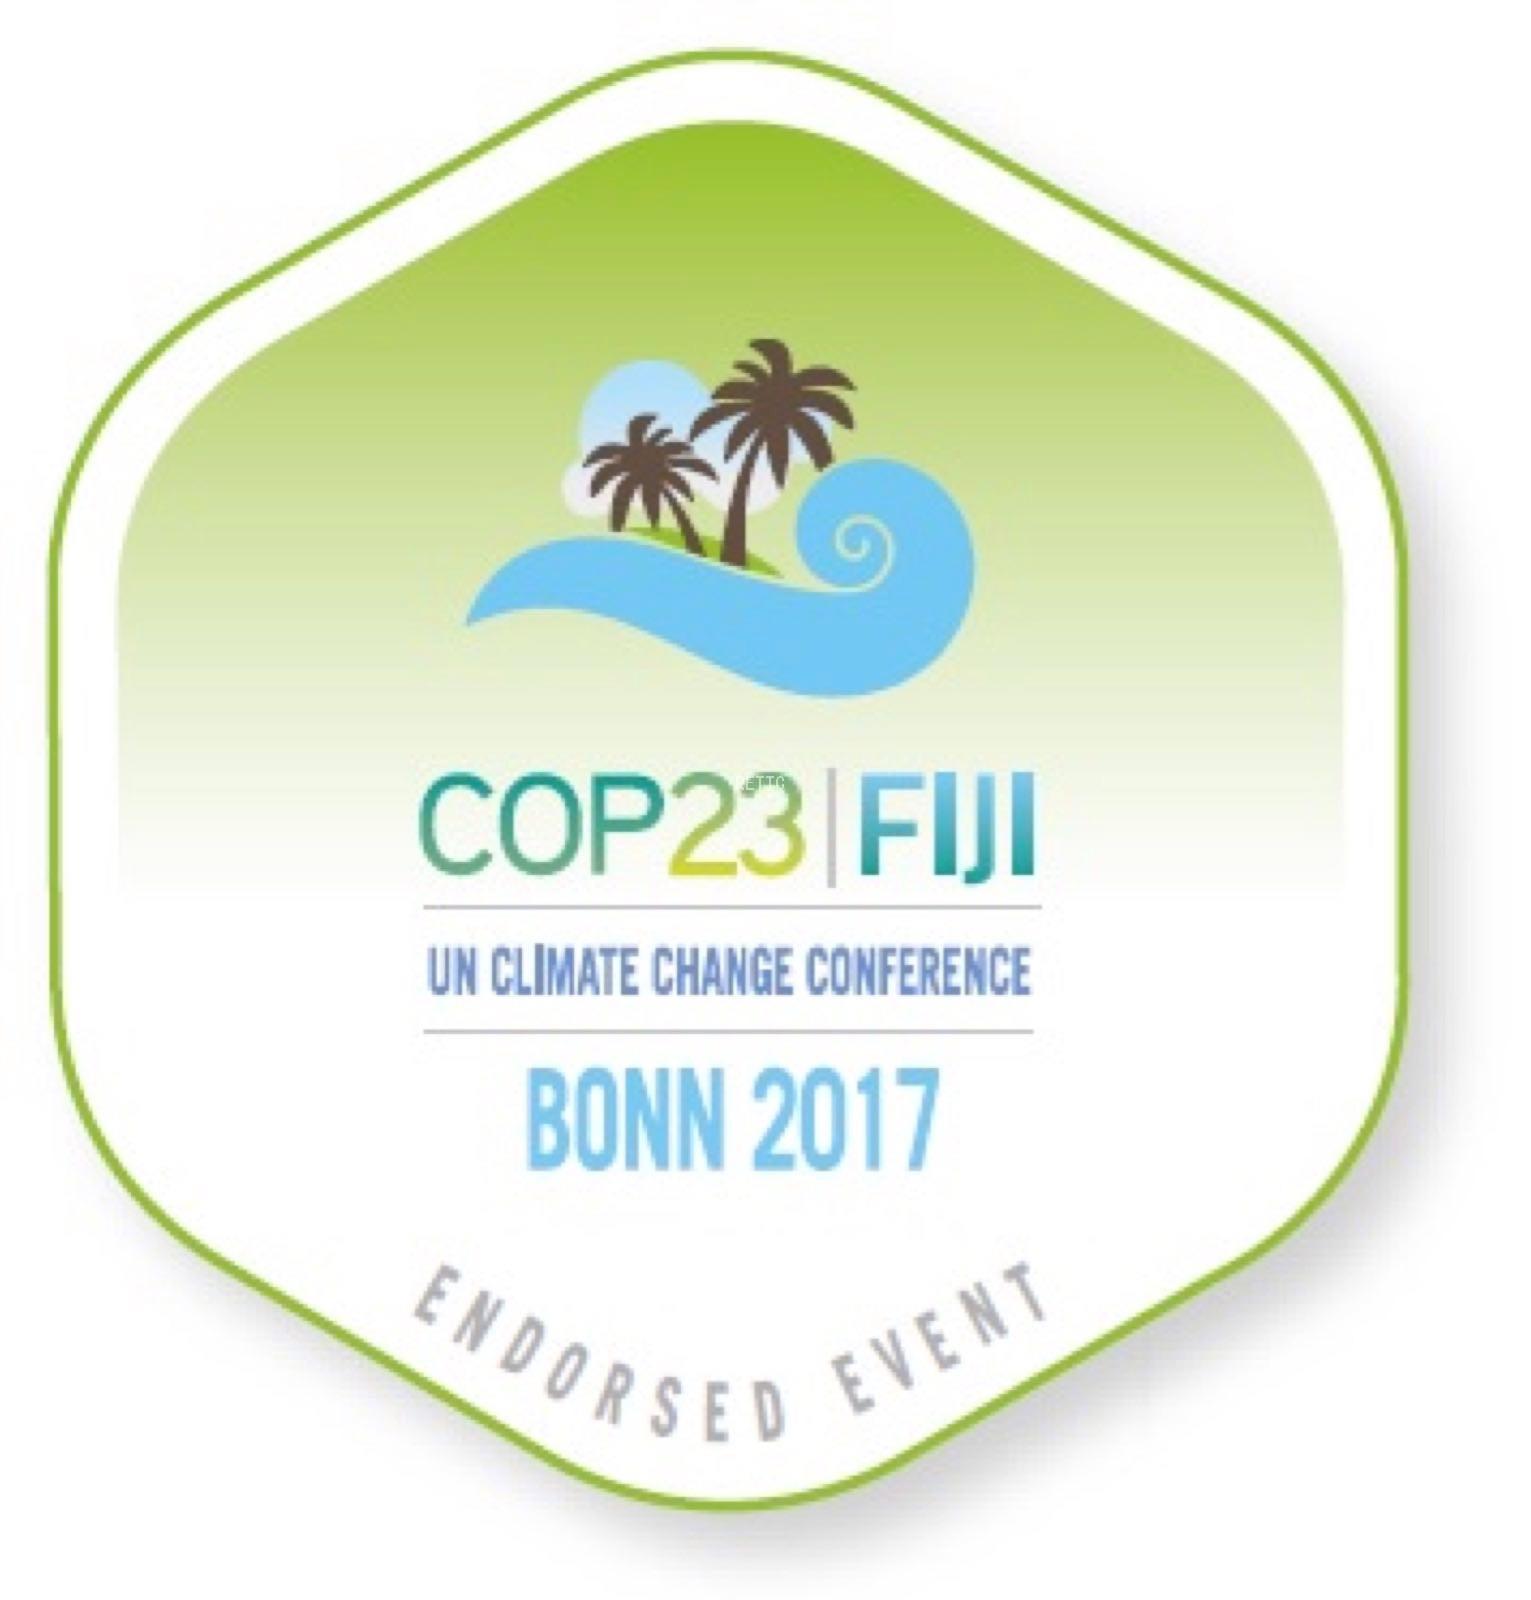 COP23 main conference